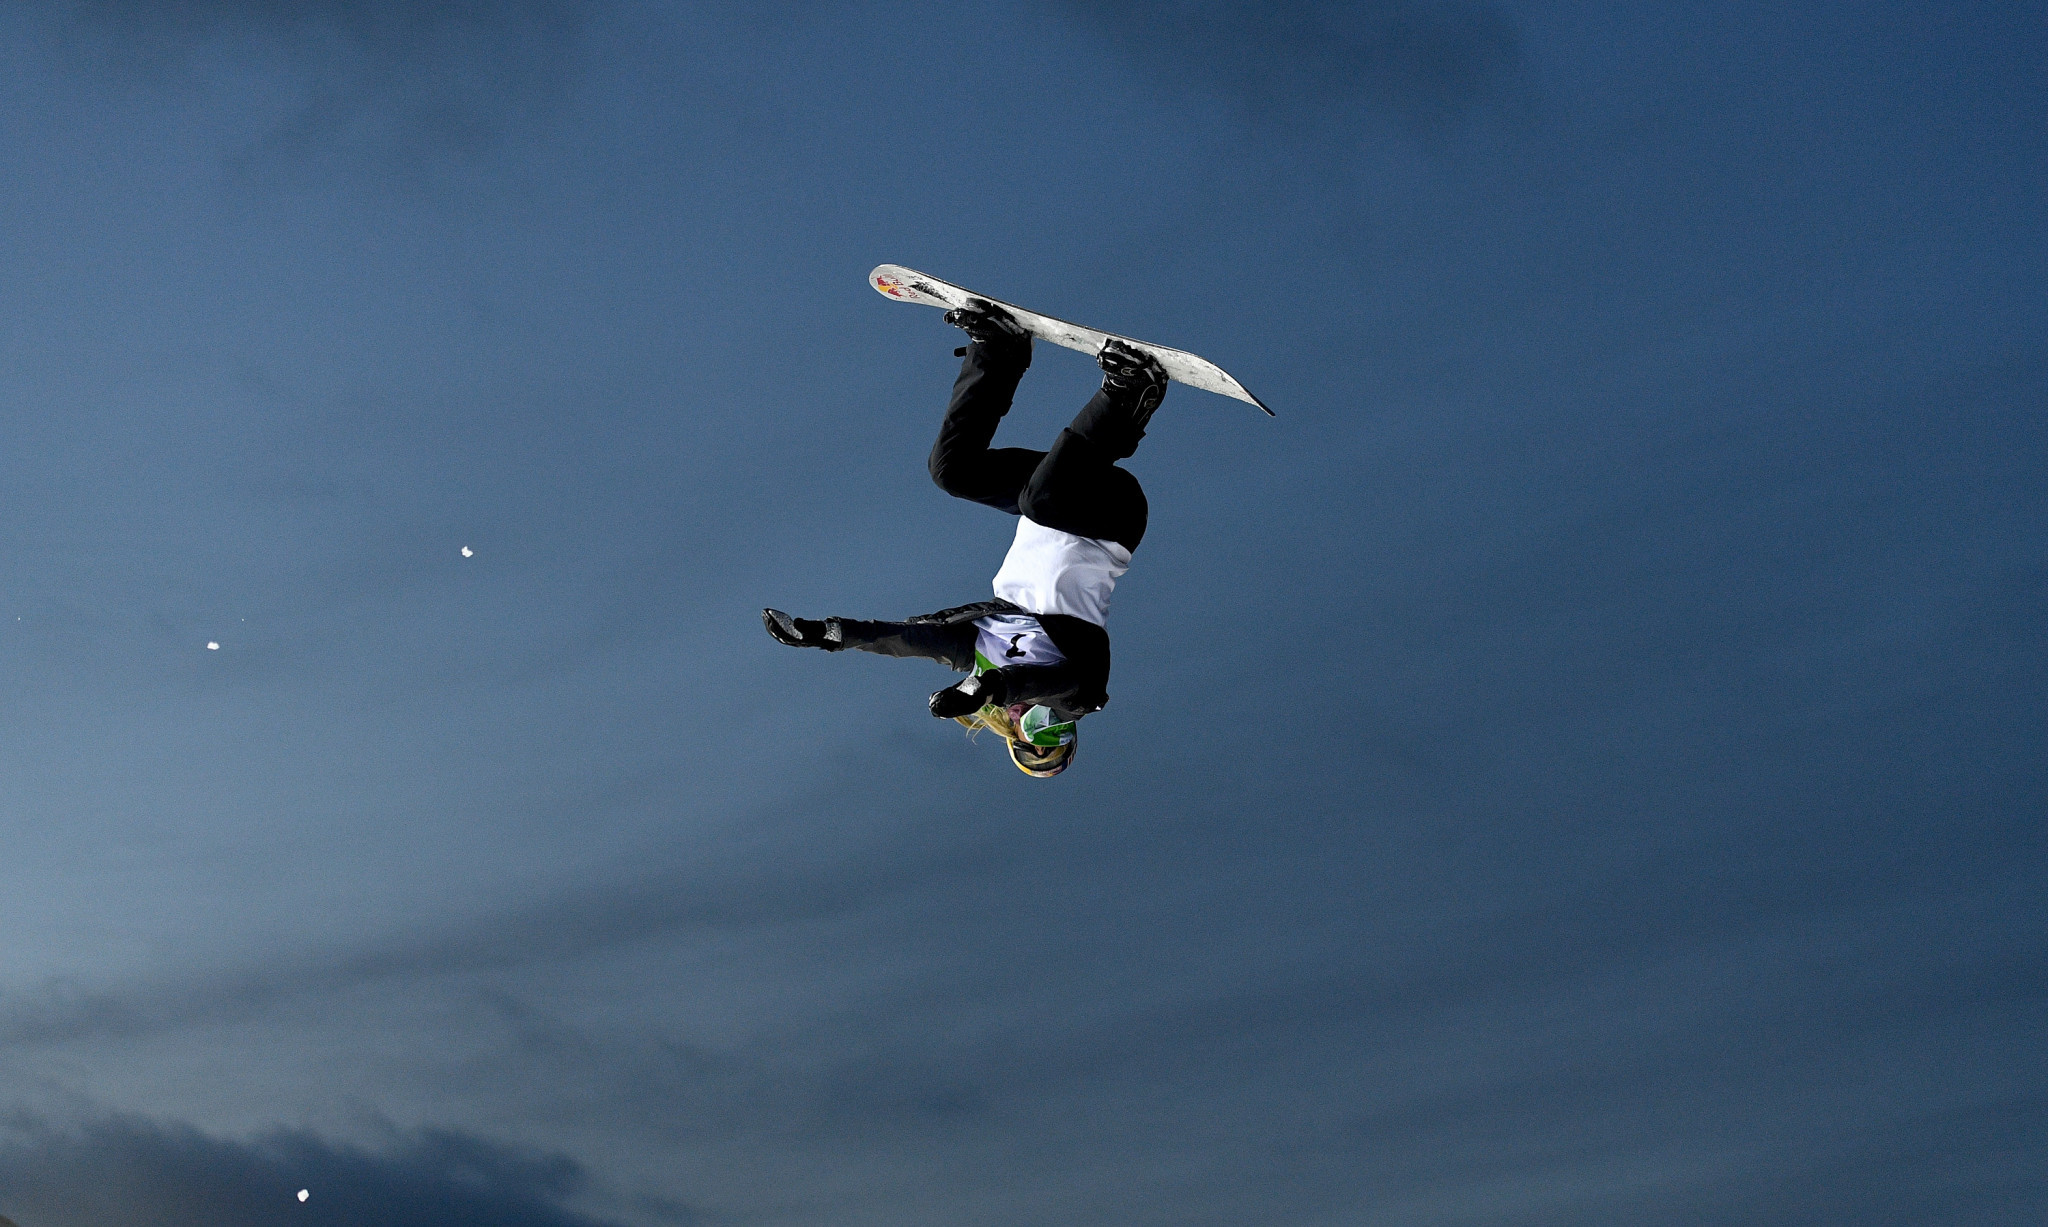 Anna Gasser warmed up for the Olympics by earning Big Air gold at the Winter X Games ©Getty Images